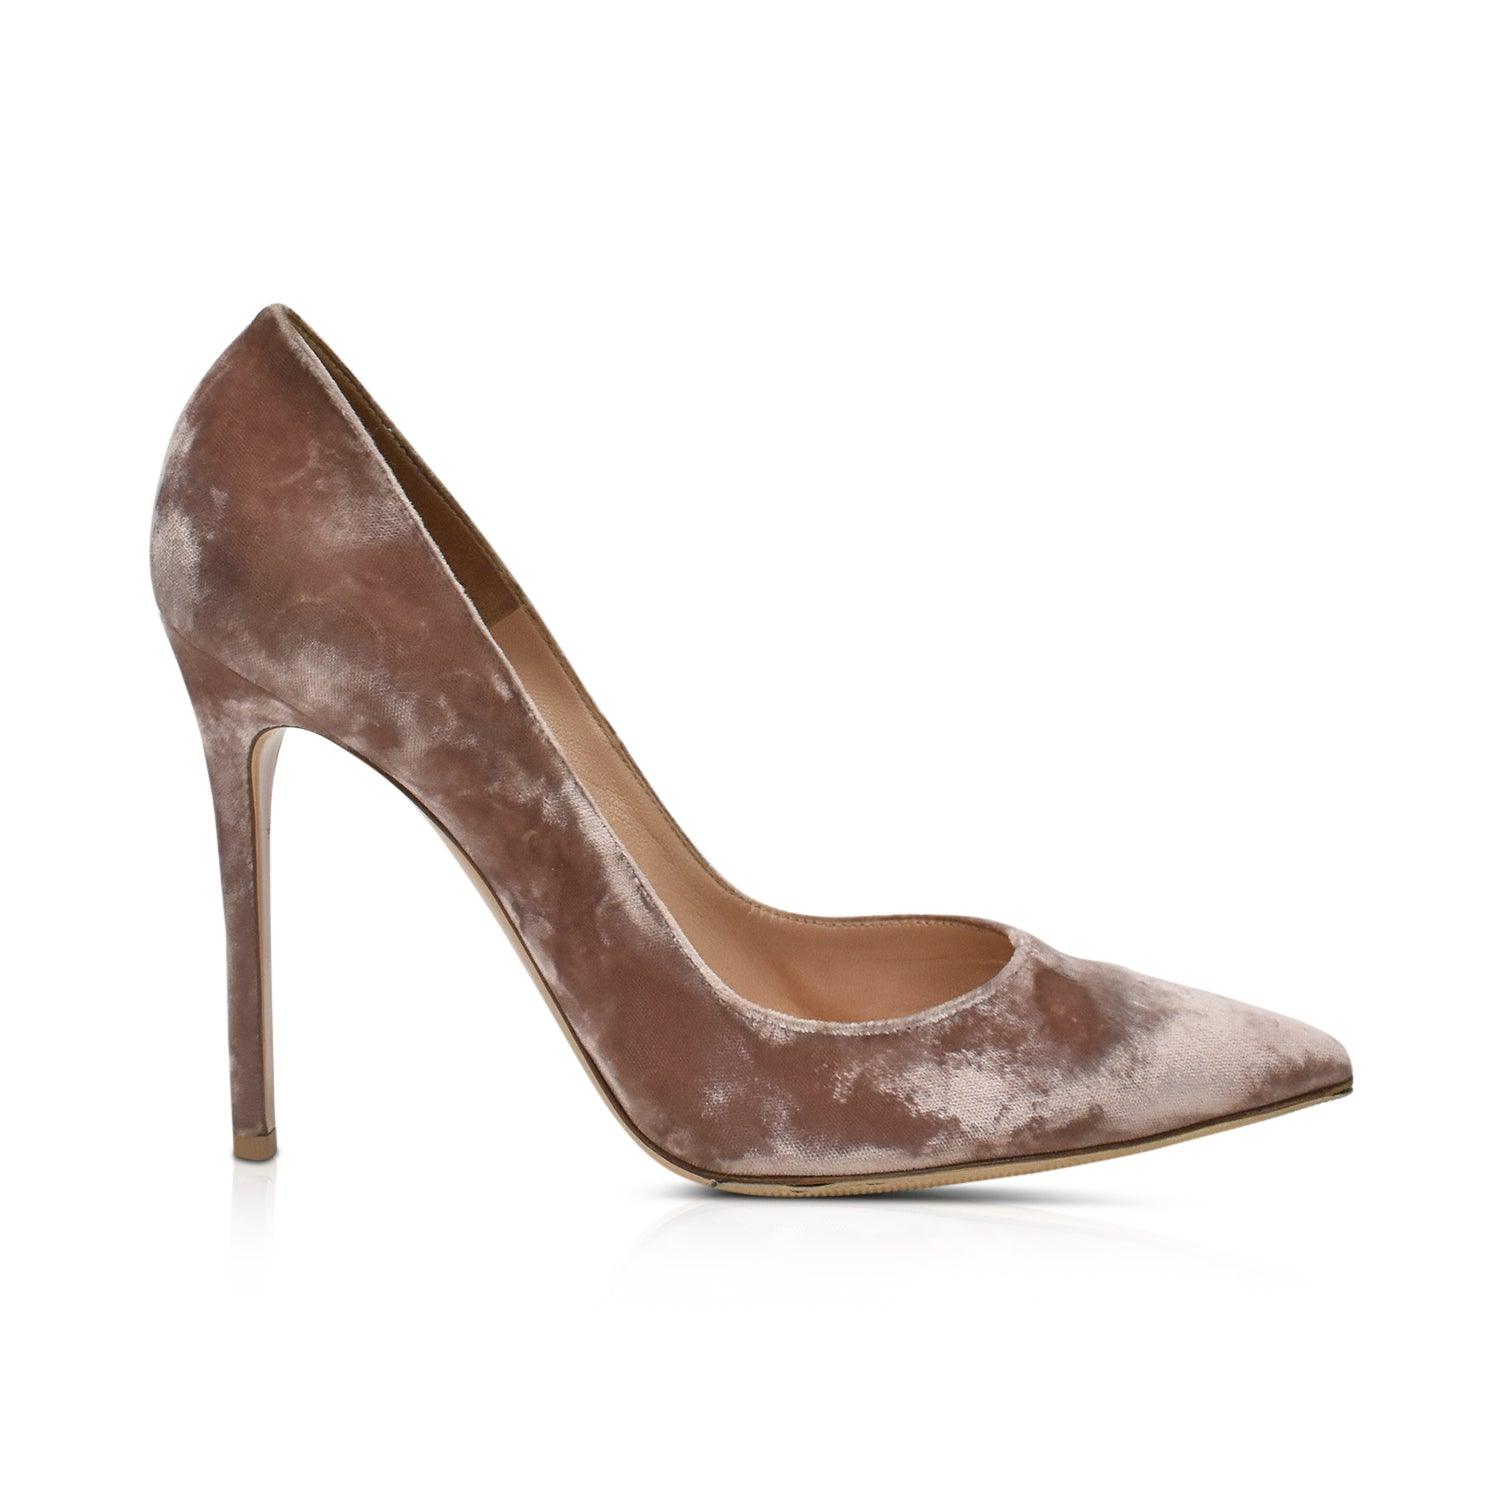 Gianvito Rossi Pumps - Women's 41 - Fashionably Yours